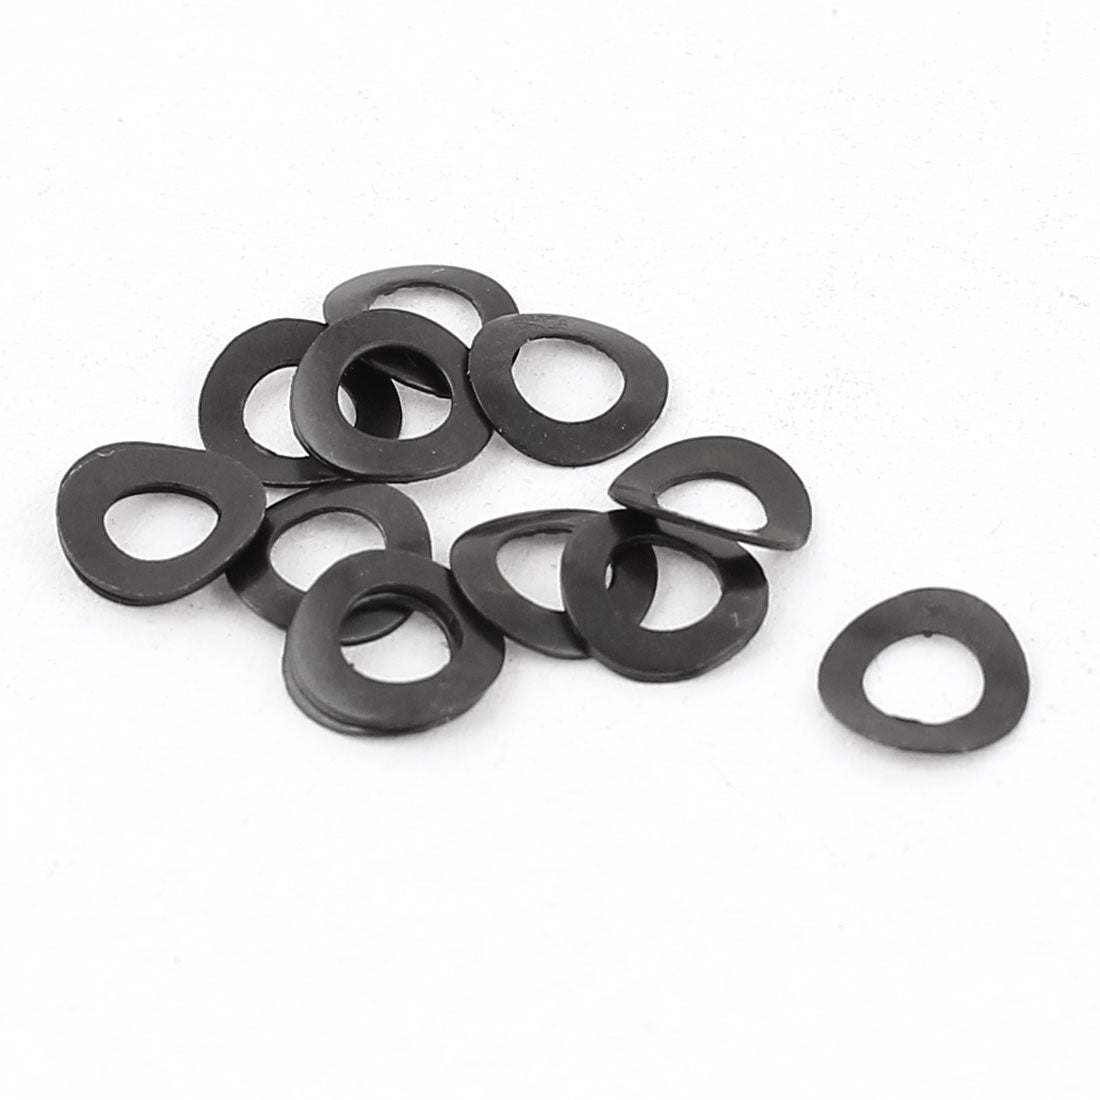 uxcell Uxcell 10 Pieces Black Metal Wave Crinkle Spring Washer 3mm x 6mm x 0.25mm